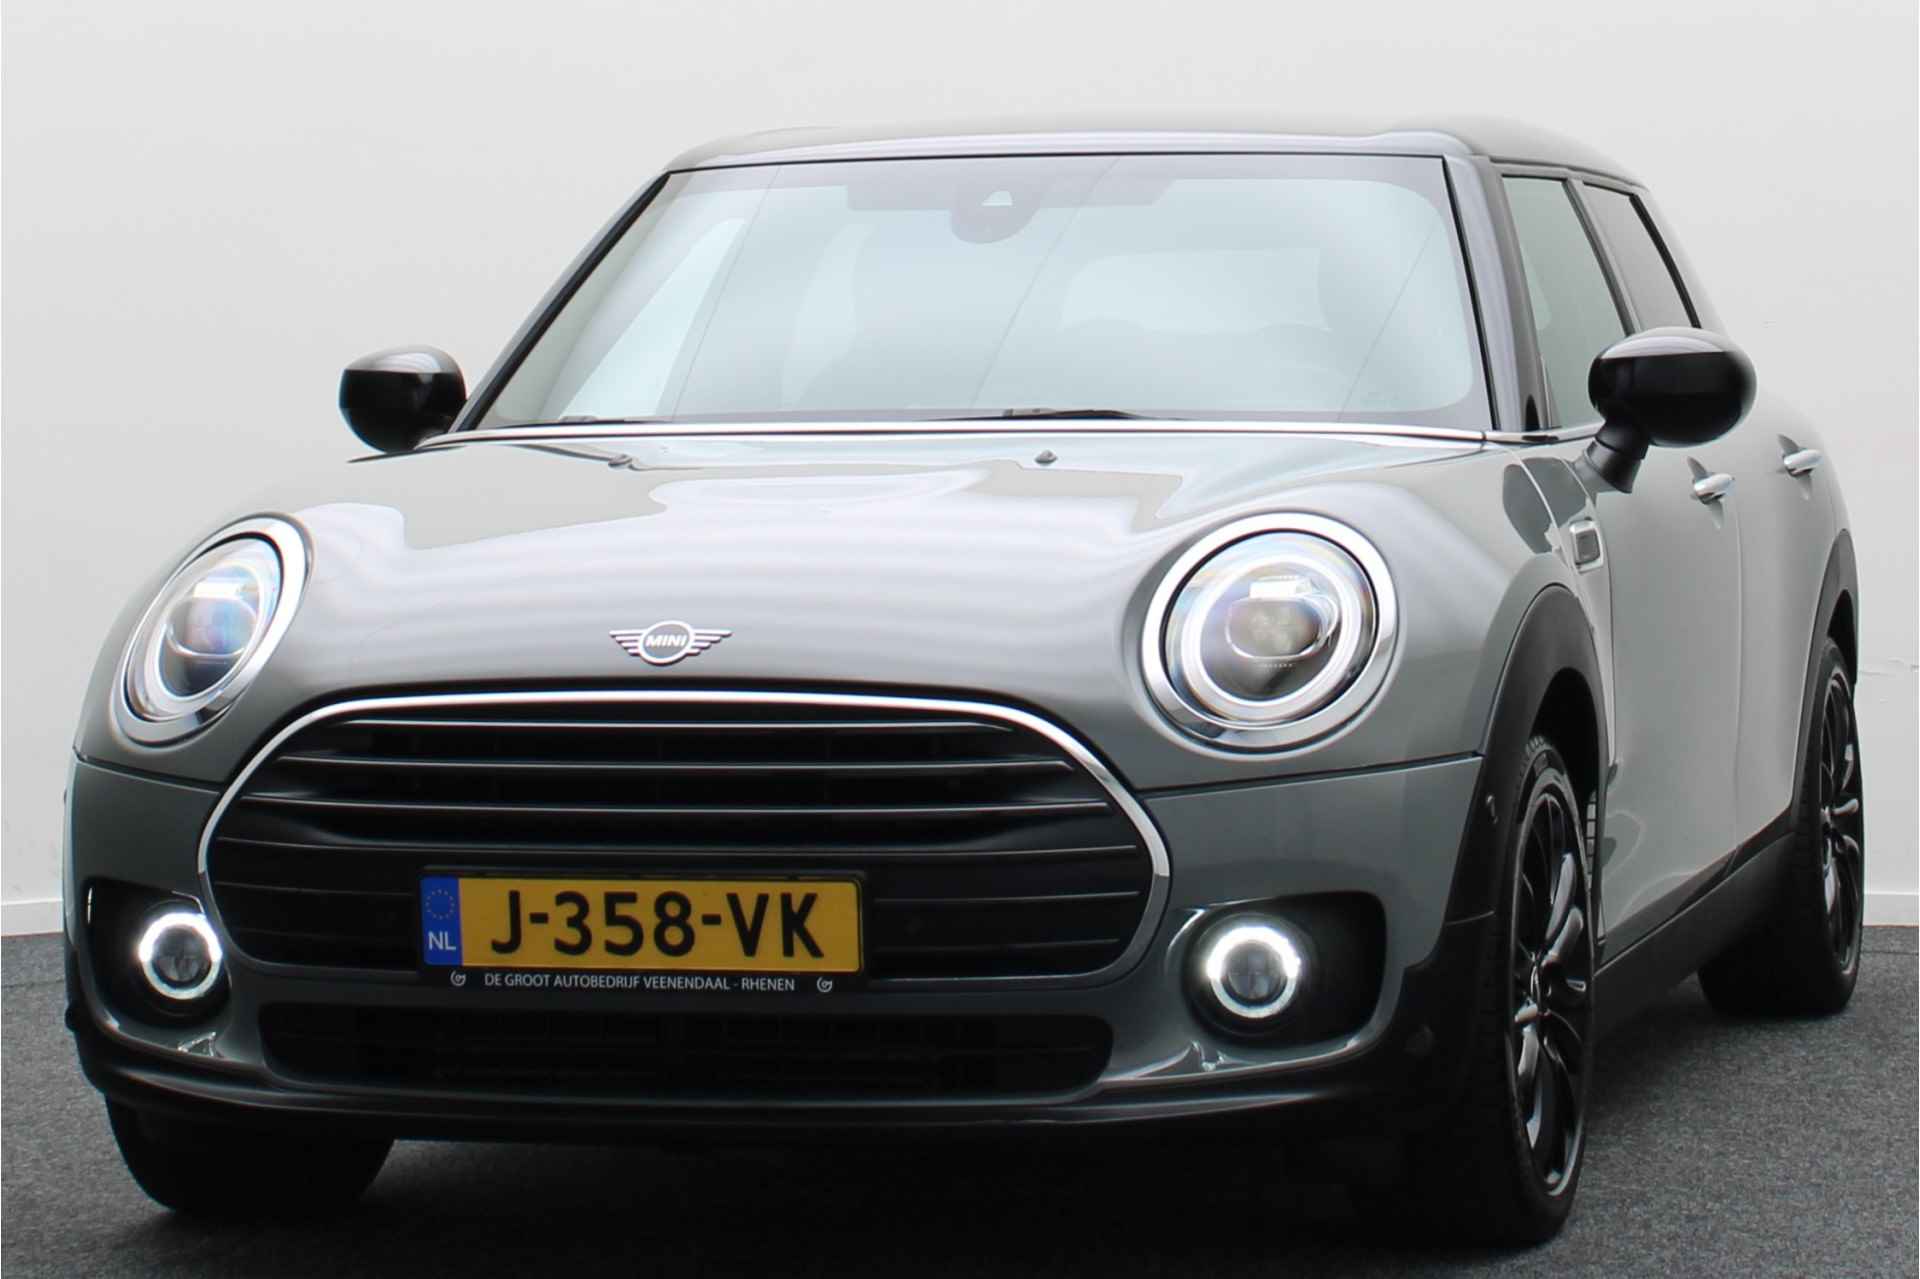 MINI Clubman 1.5 Cooper Business Edition Automaat LED, Keyless, Two-Tone lak, Navigatie, Cruise, PDC, Climate, 17” - 21/44